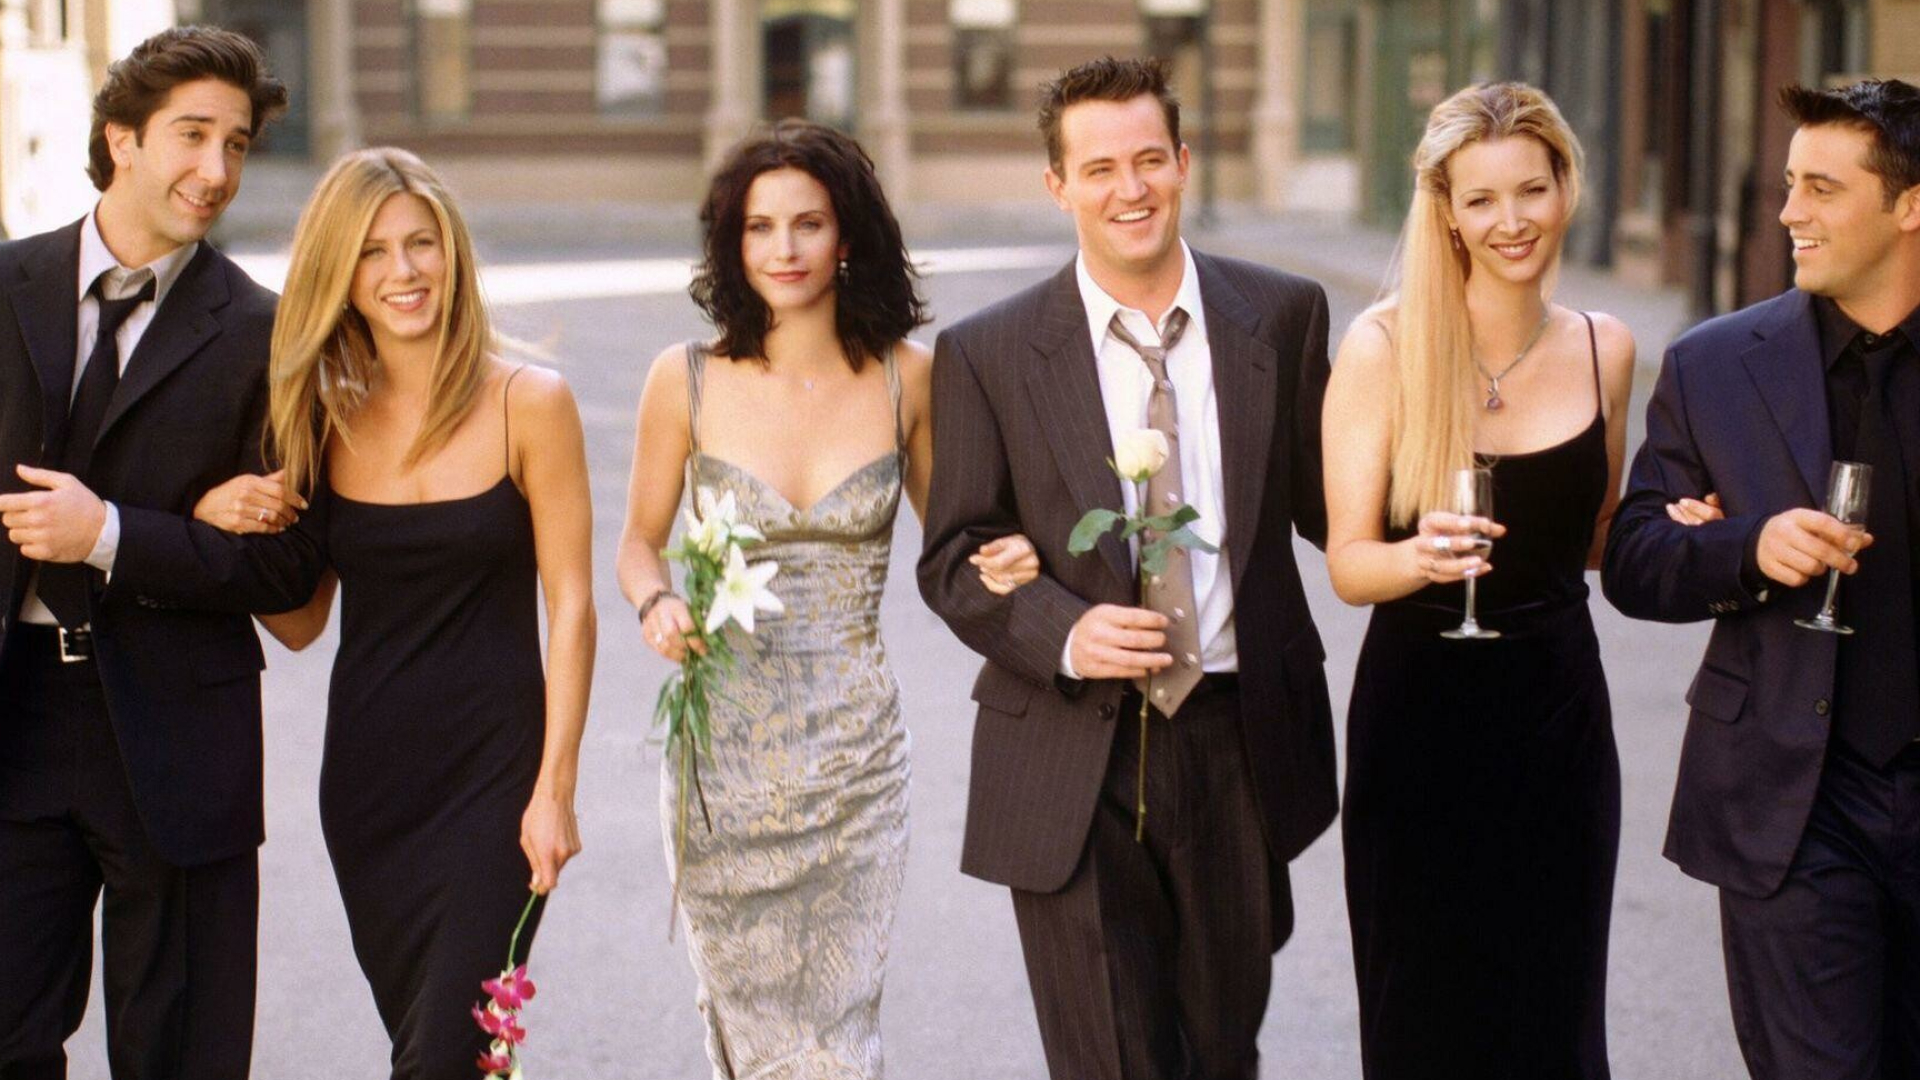 Friends (TV Series): Three guys and three girls in their twenties, pursue careers, love and happiness in New York City while relying on each other for support. 1920x1080 Full HD Wallpaper.